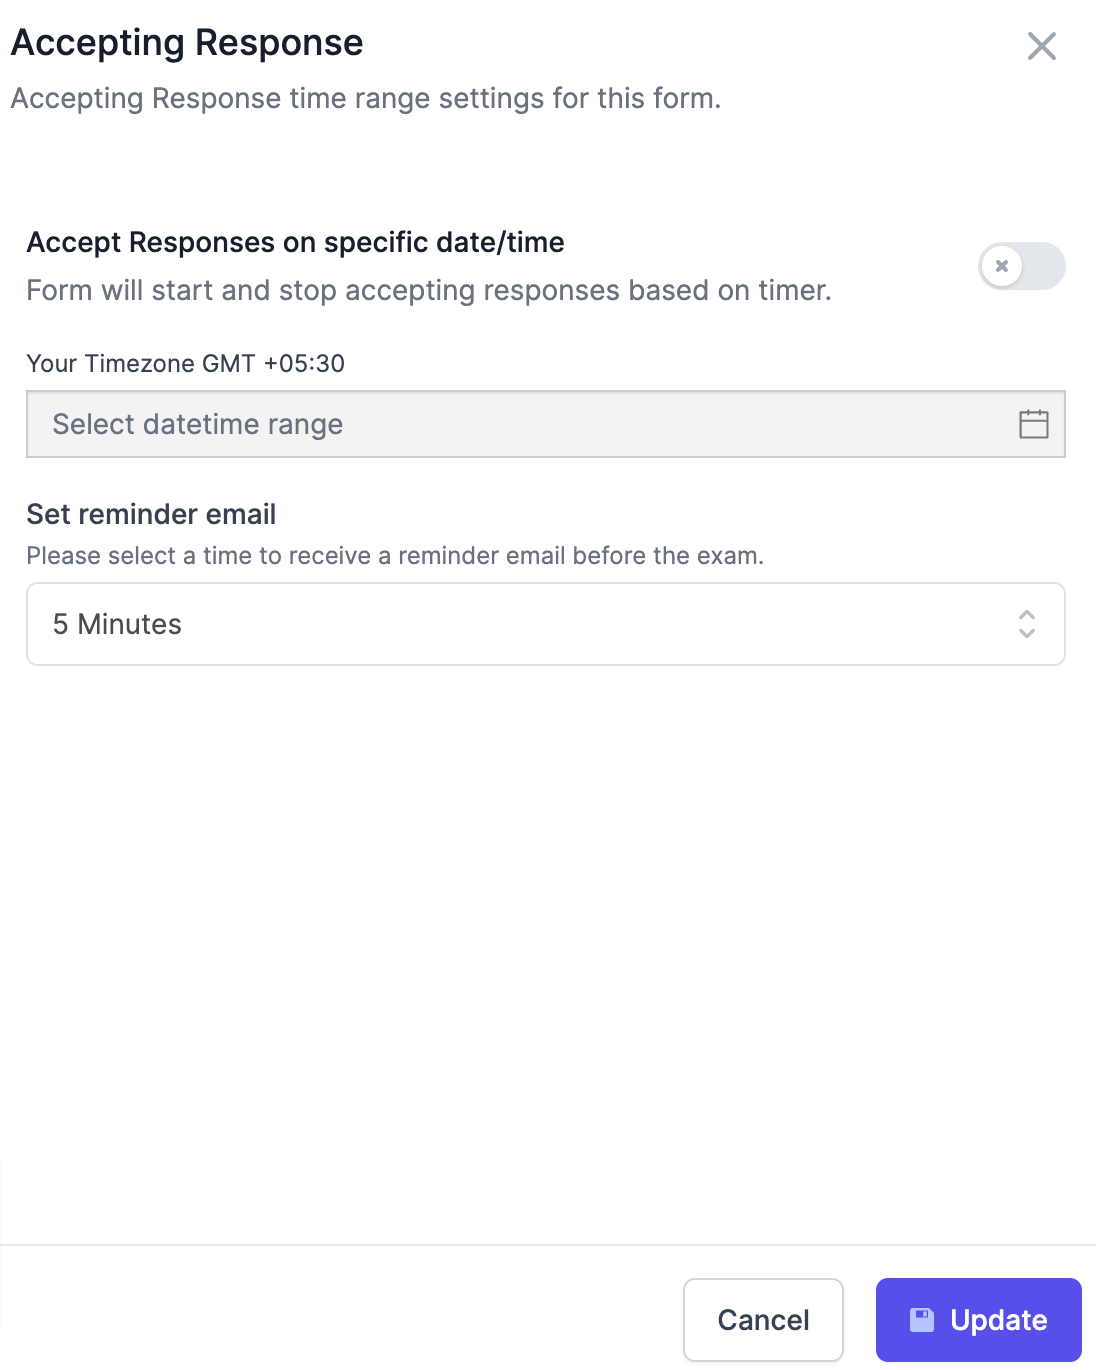 accepting-response-form-settings